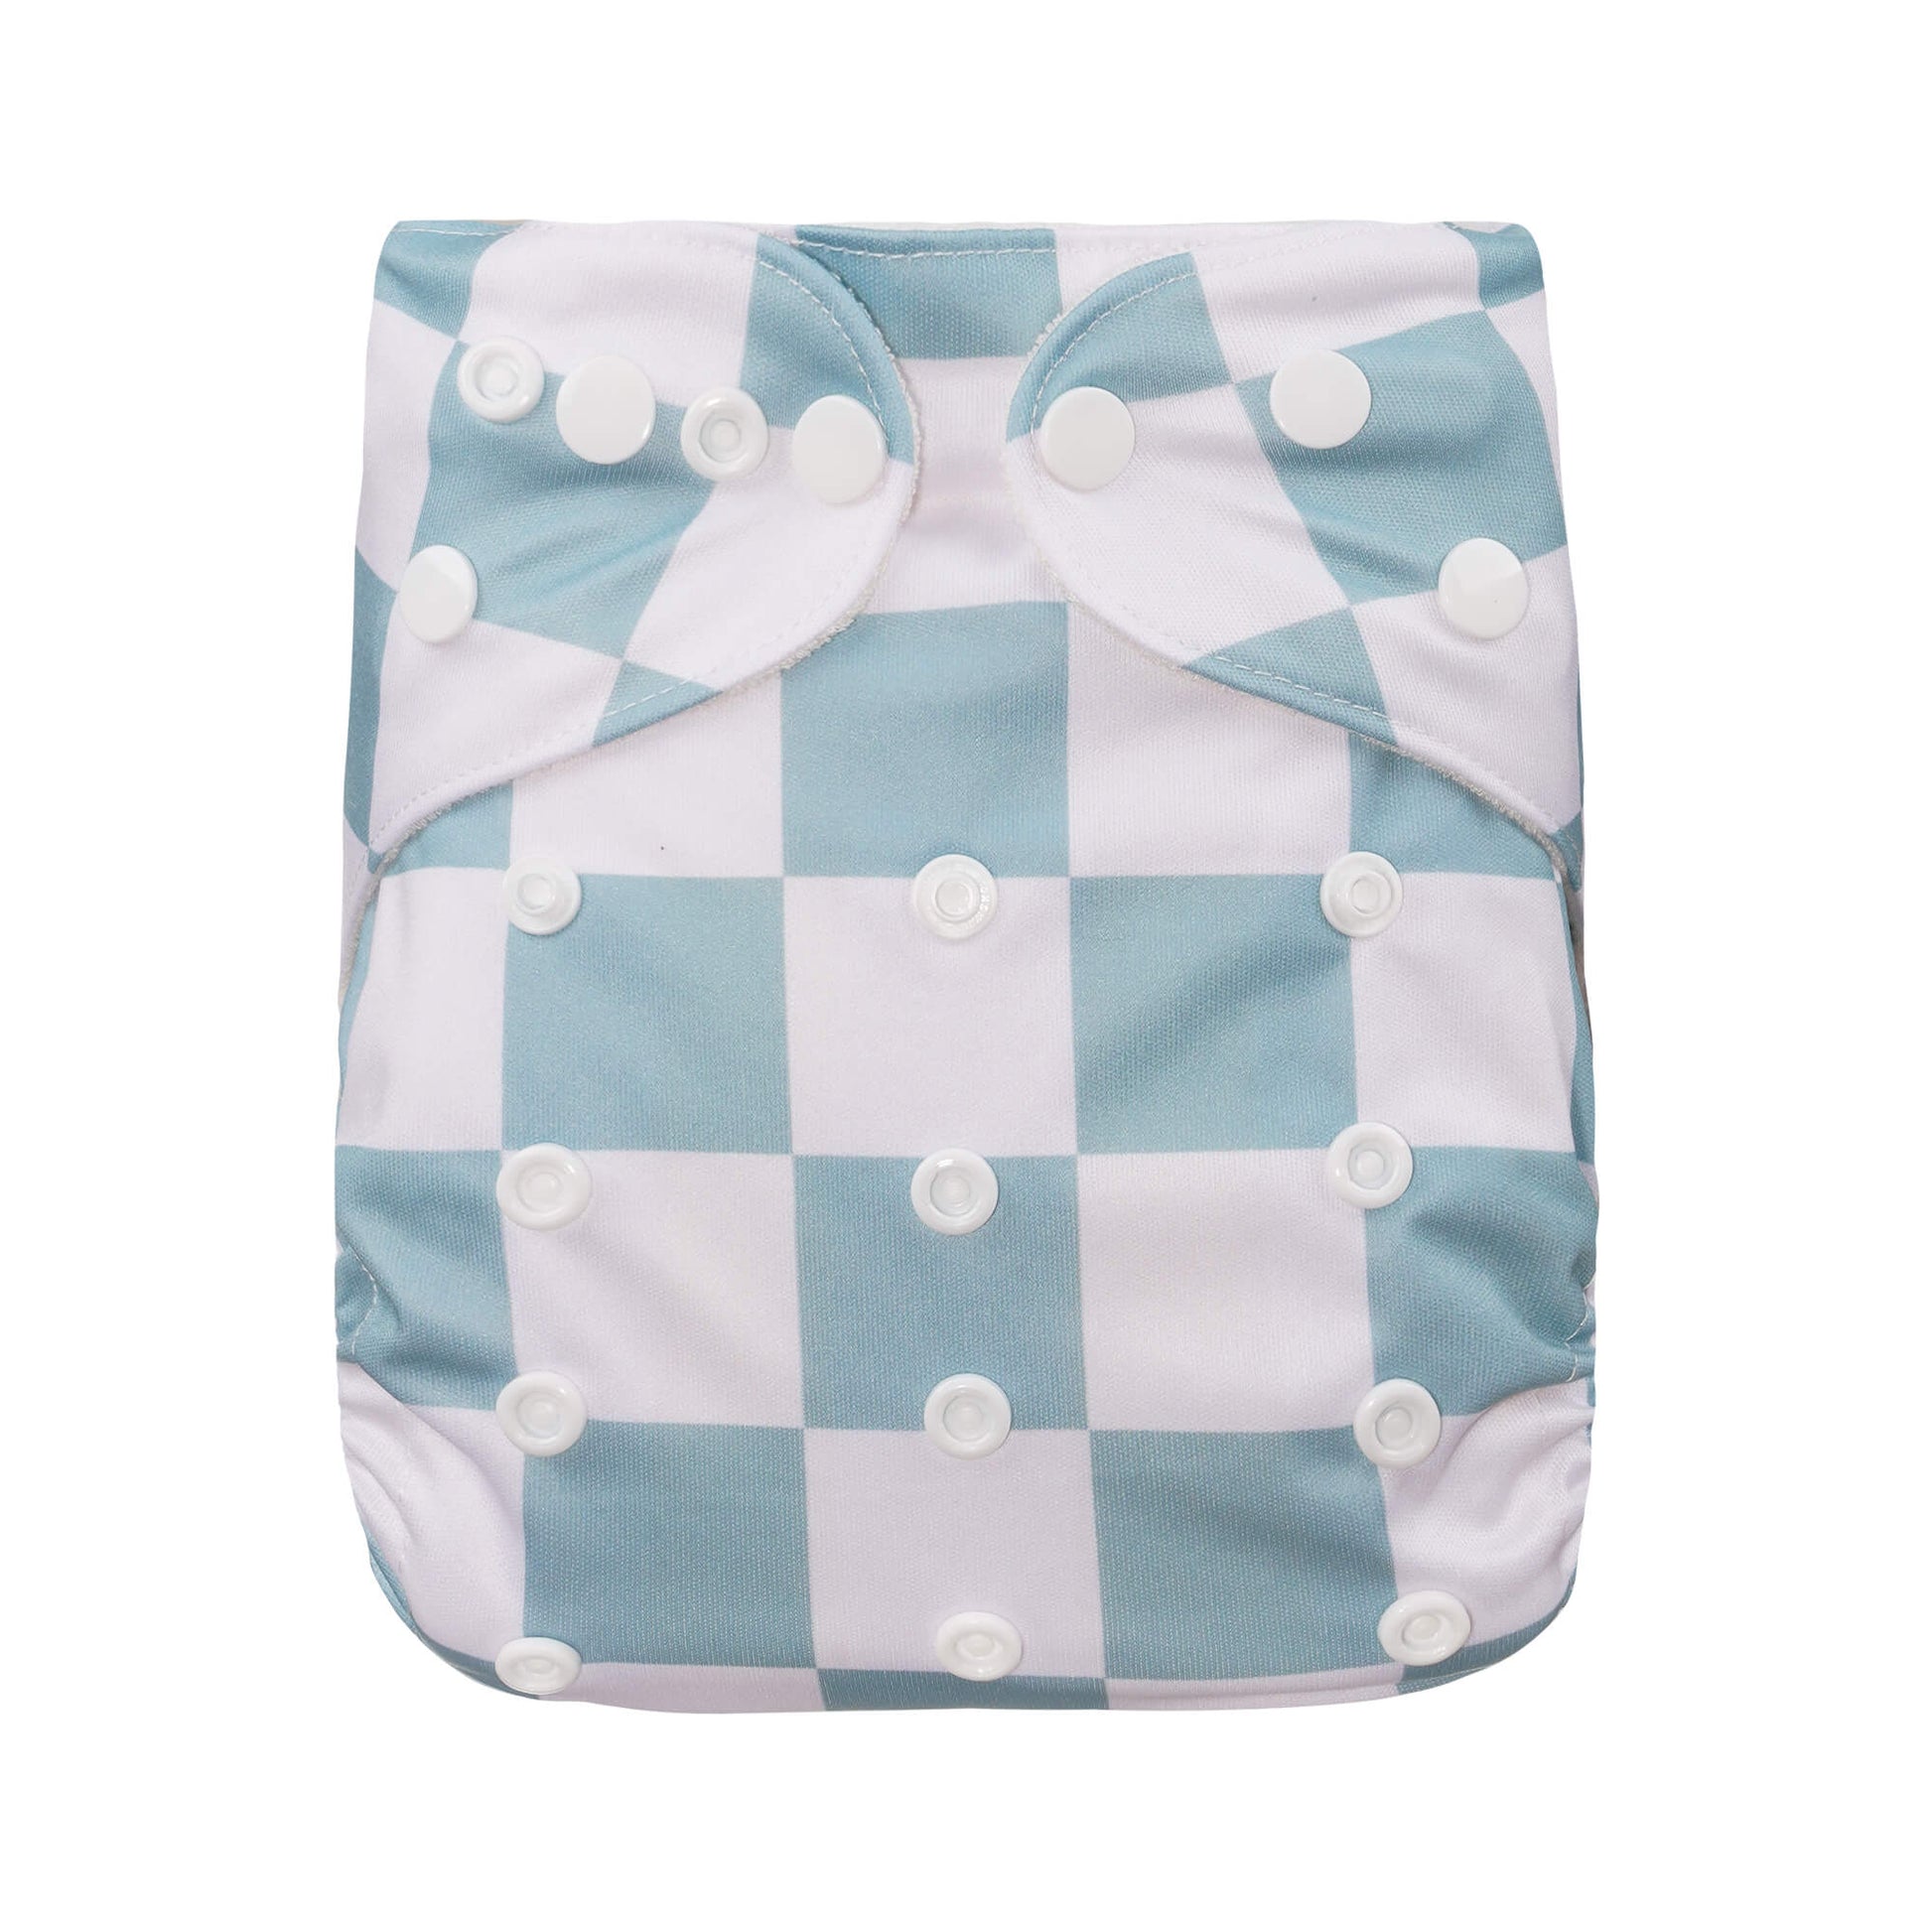 Bear & Moo One Size Fits Most Reusable Cloth Nappy in Checkerboard